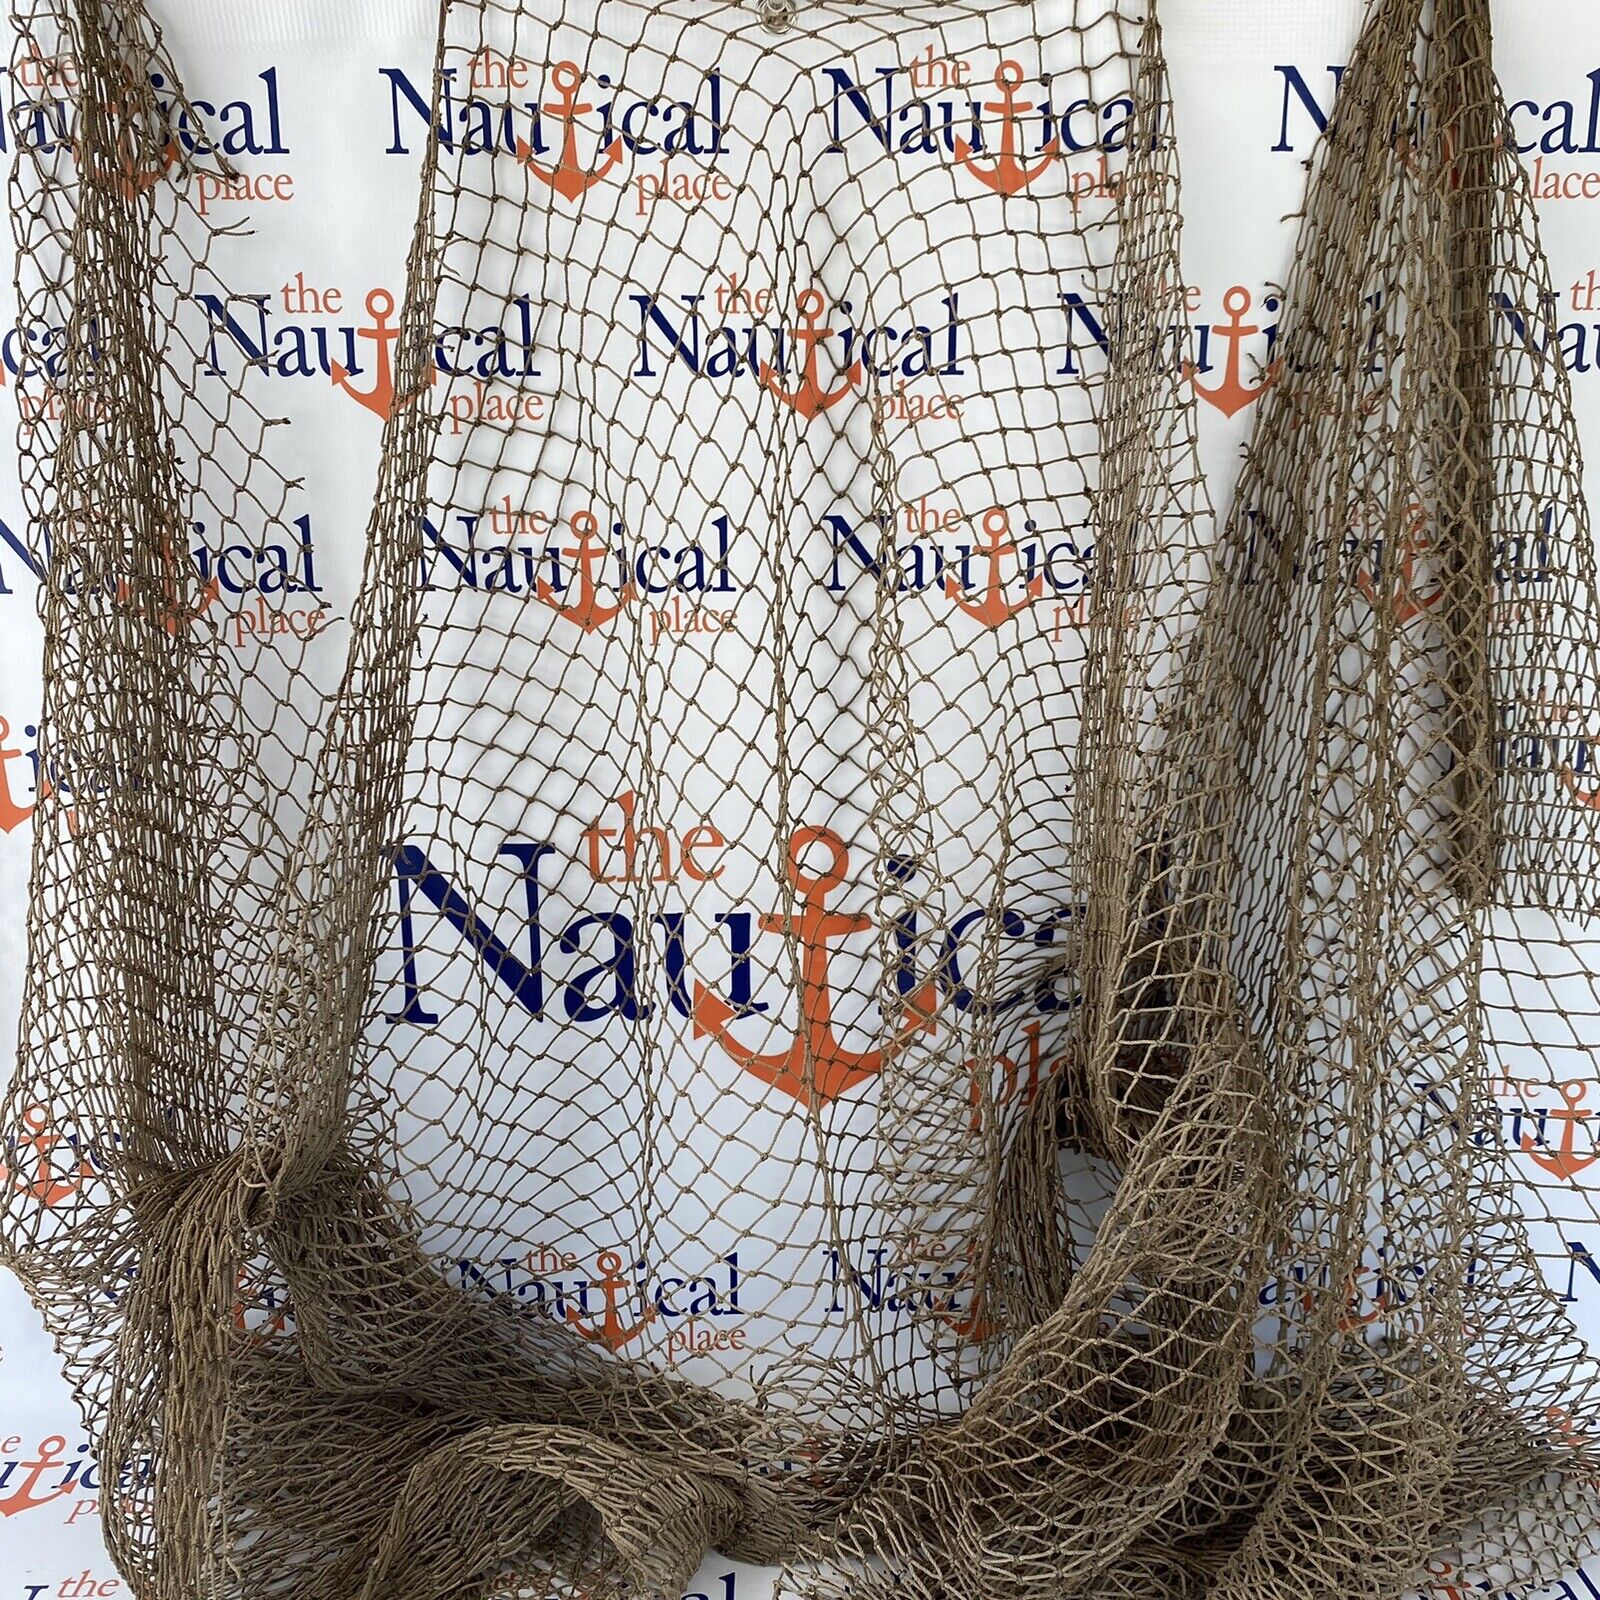 Real Genuine Fish Net, 10'x10', Netting For Camo, Military Surplus, Ghillie Suit